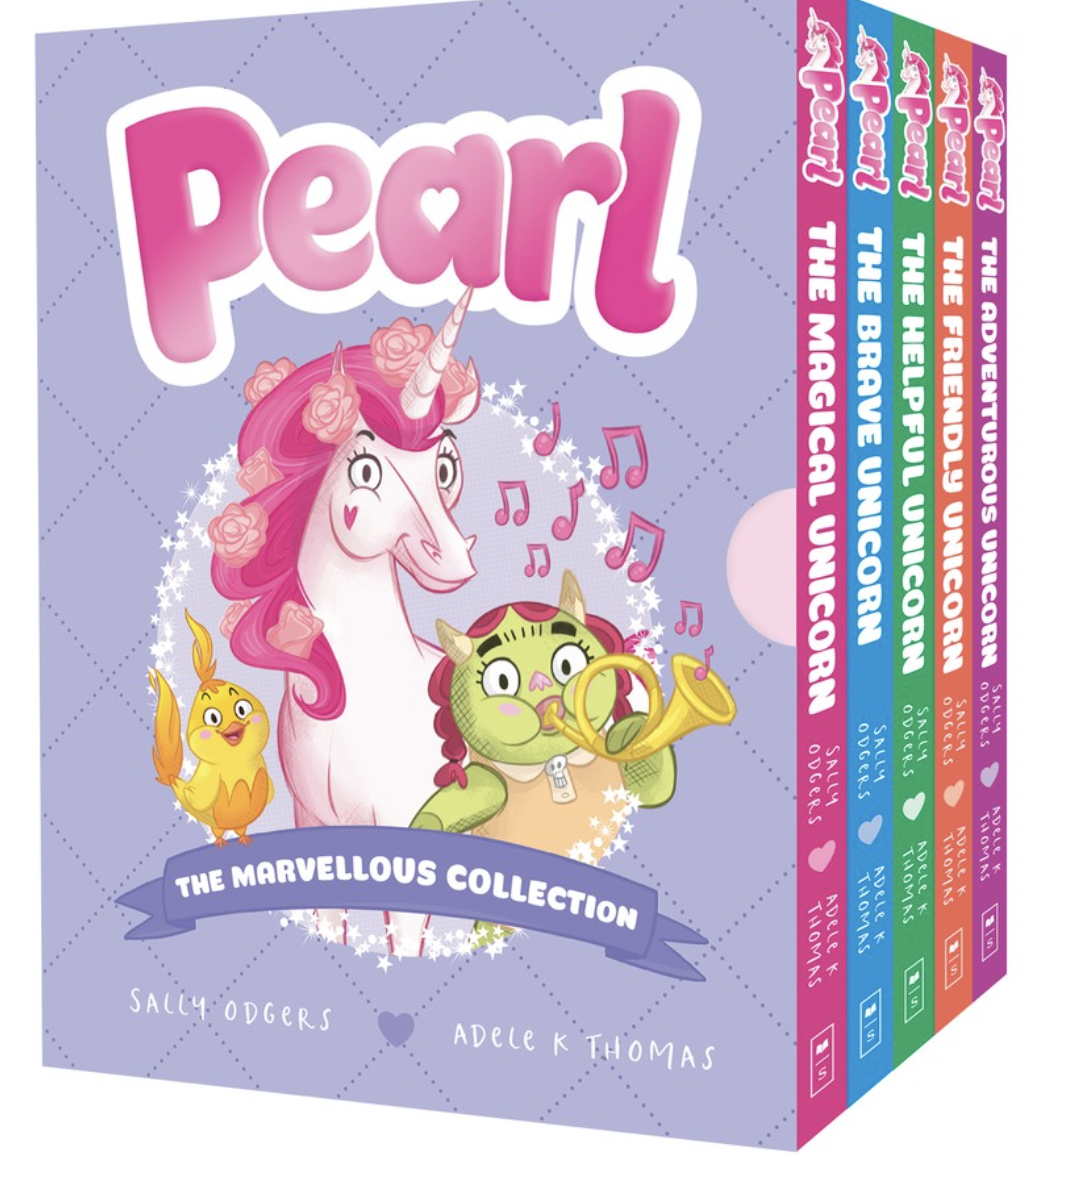 The Marvellous Collection (Pearl) by Sally Odgers